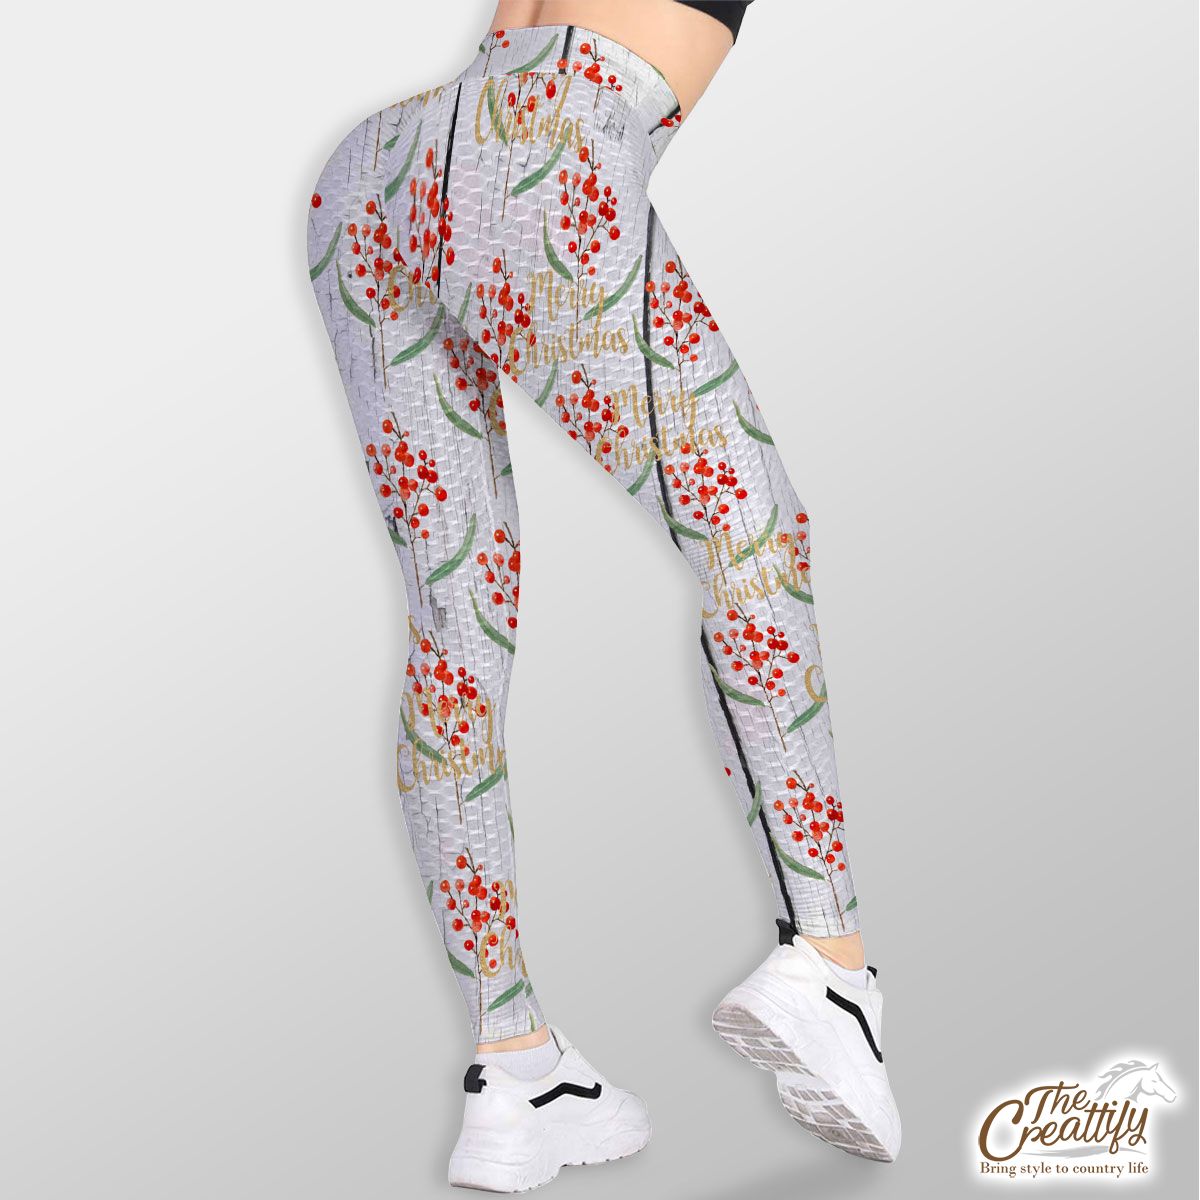 Red Berries With Merry Christmas Wishes TikTok Leggings